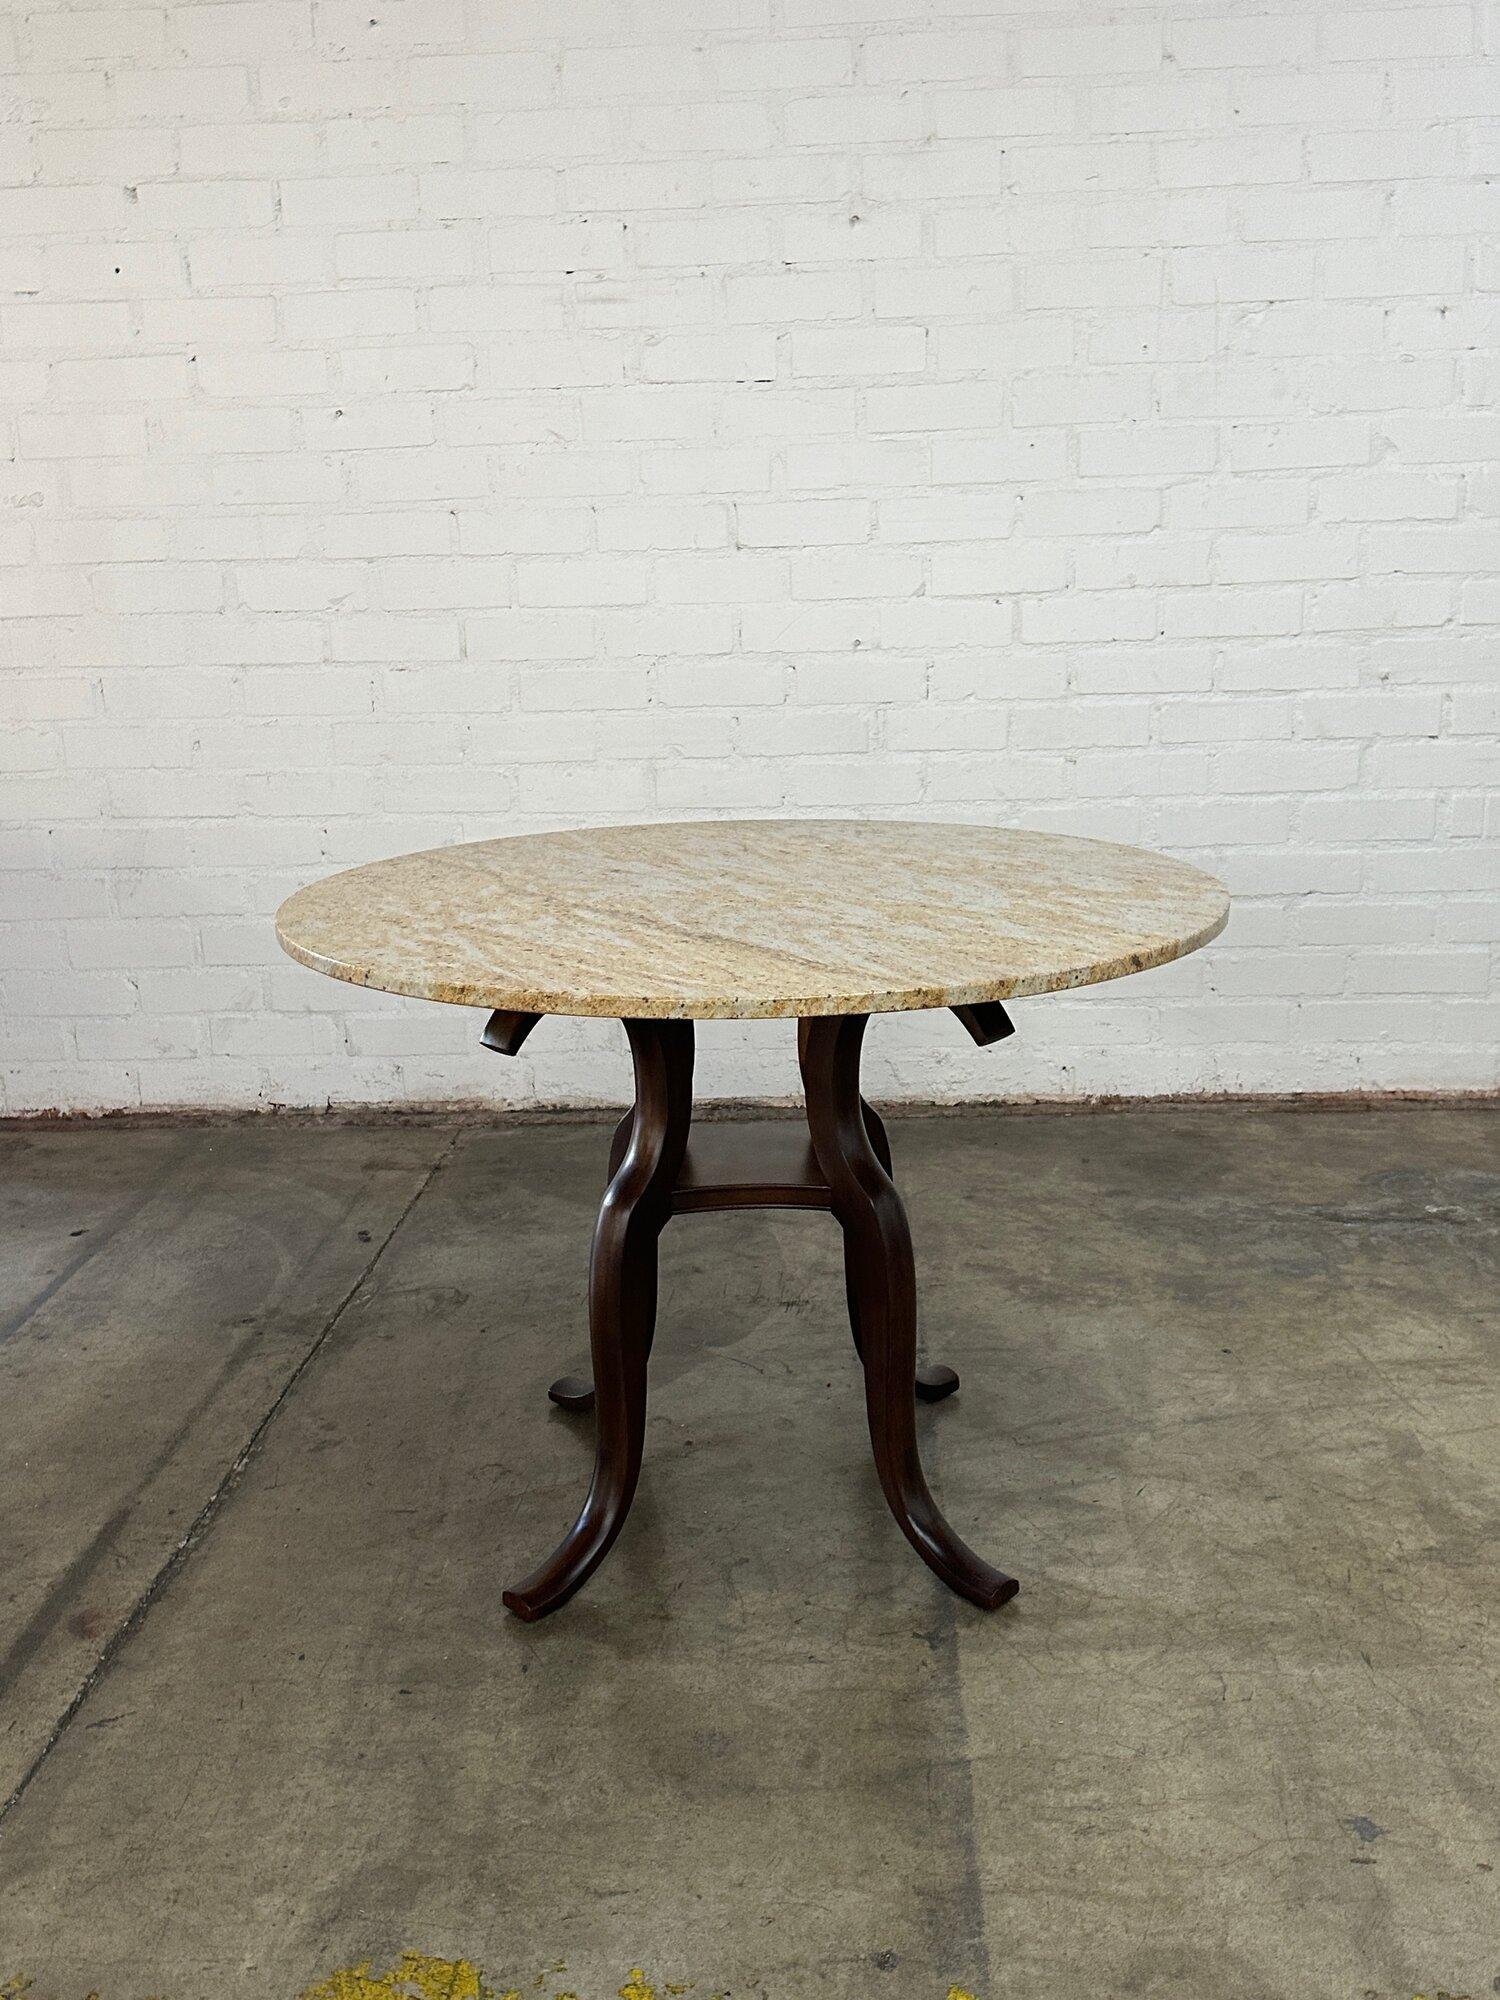 W42 H30.5 Knee Clearance: 29

Small Table with a round granite top and a solid wood sculpted base refinished in a deep walnut stain. Item is structurally sound and sturdy. Top has no visual chips, breaks or stains.